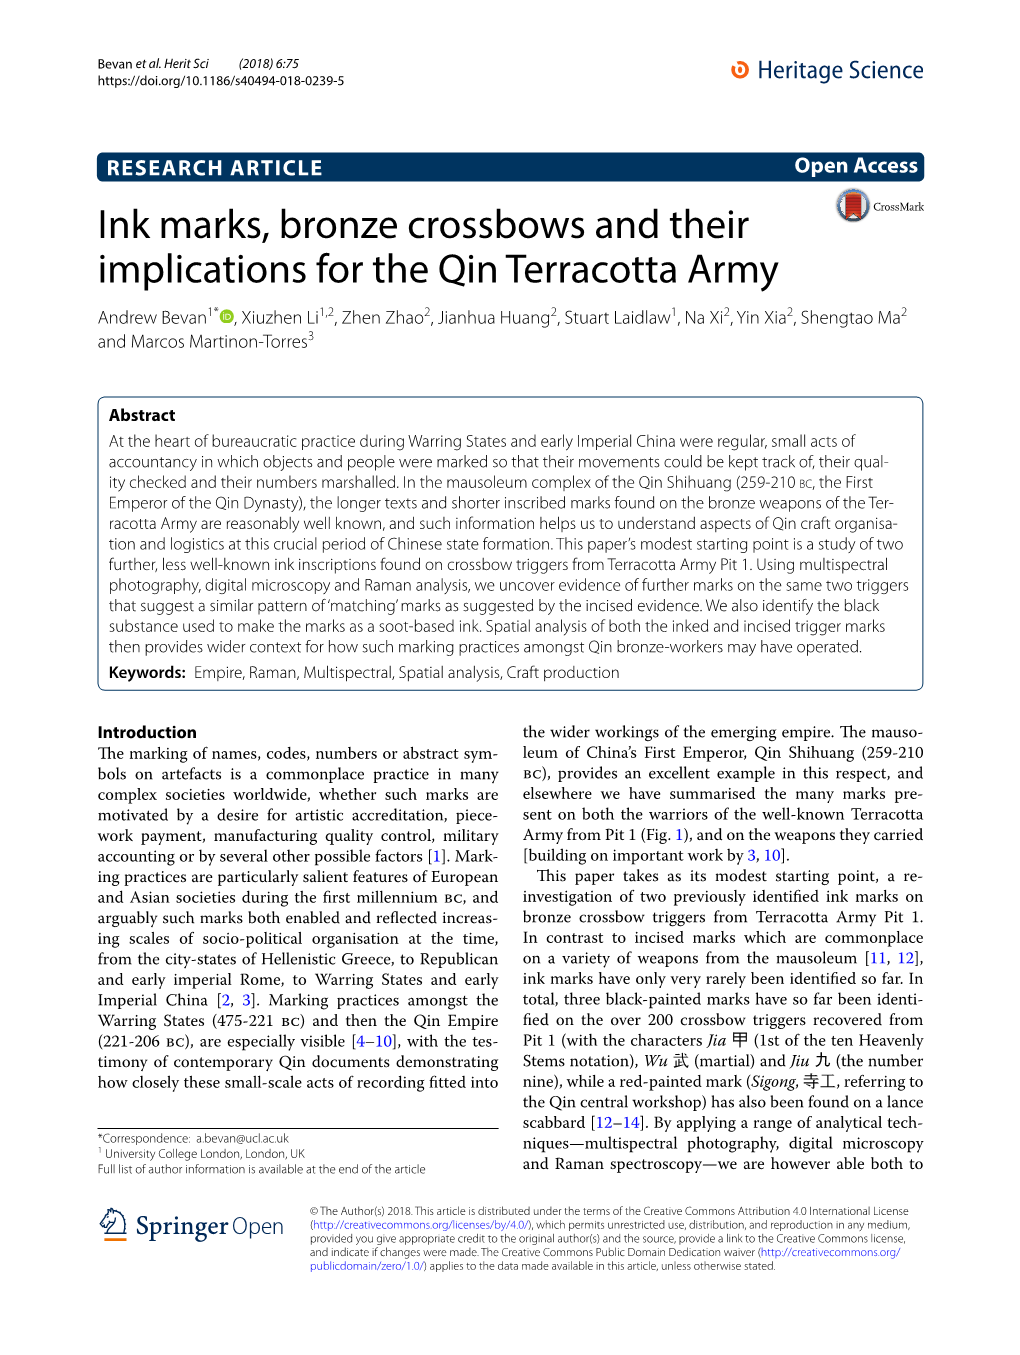 Ink Marks, Bronze Crossbows and Their Implications for the Qin Terracotta